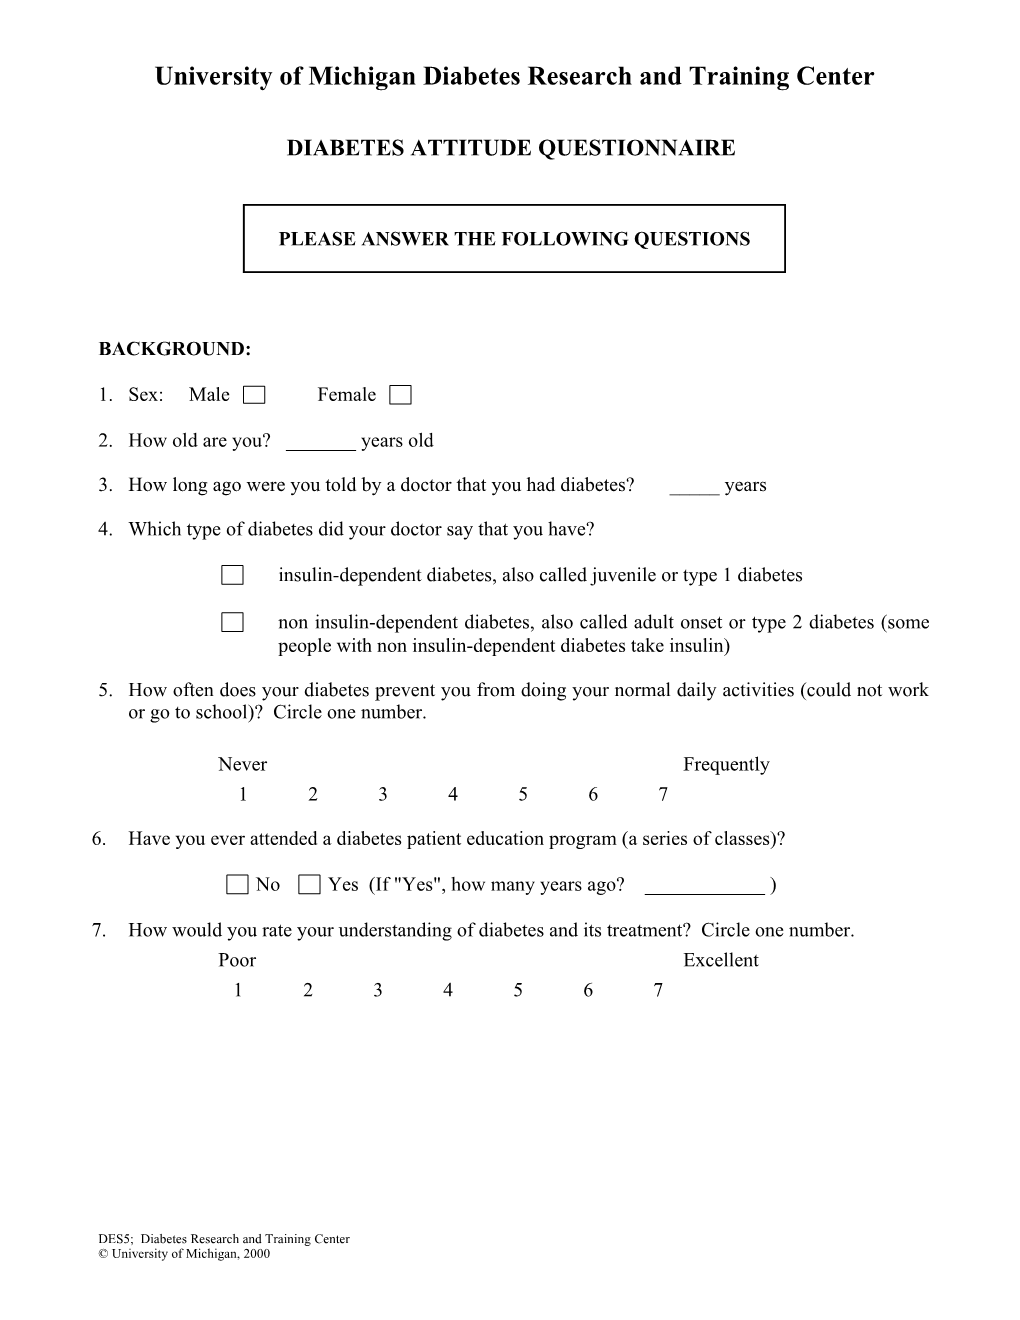 (NOTE: Not Necessary to Send the First Two Pages of This Questionnaire When People Call